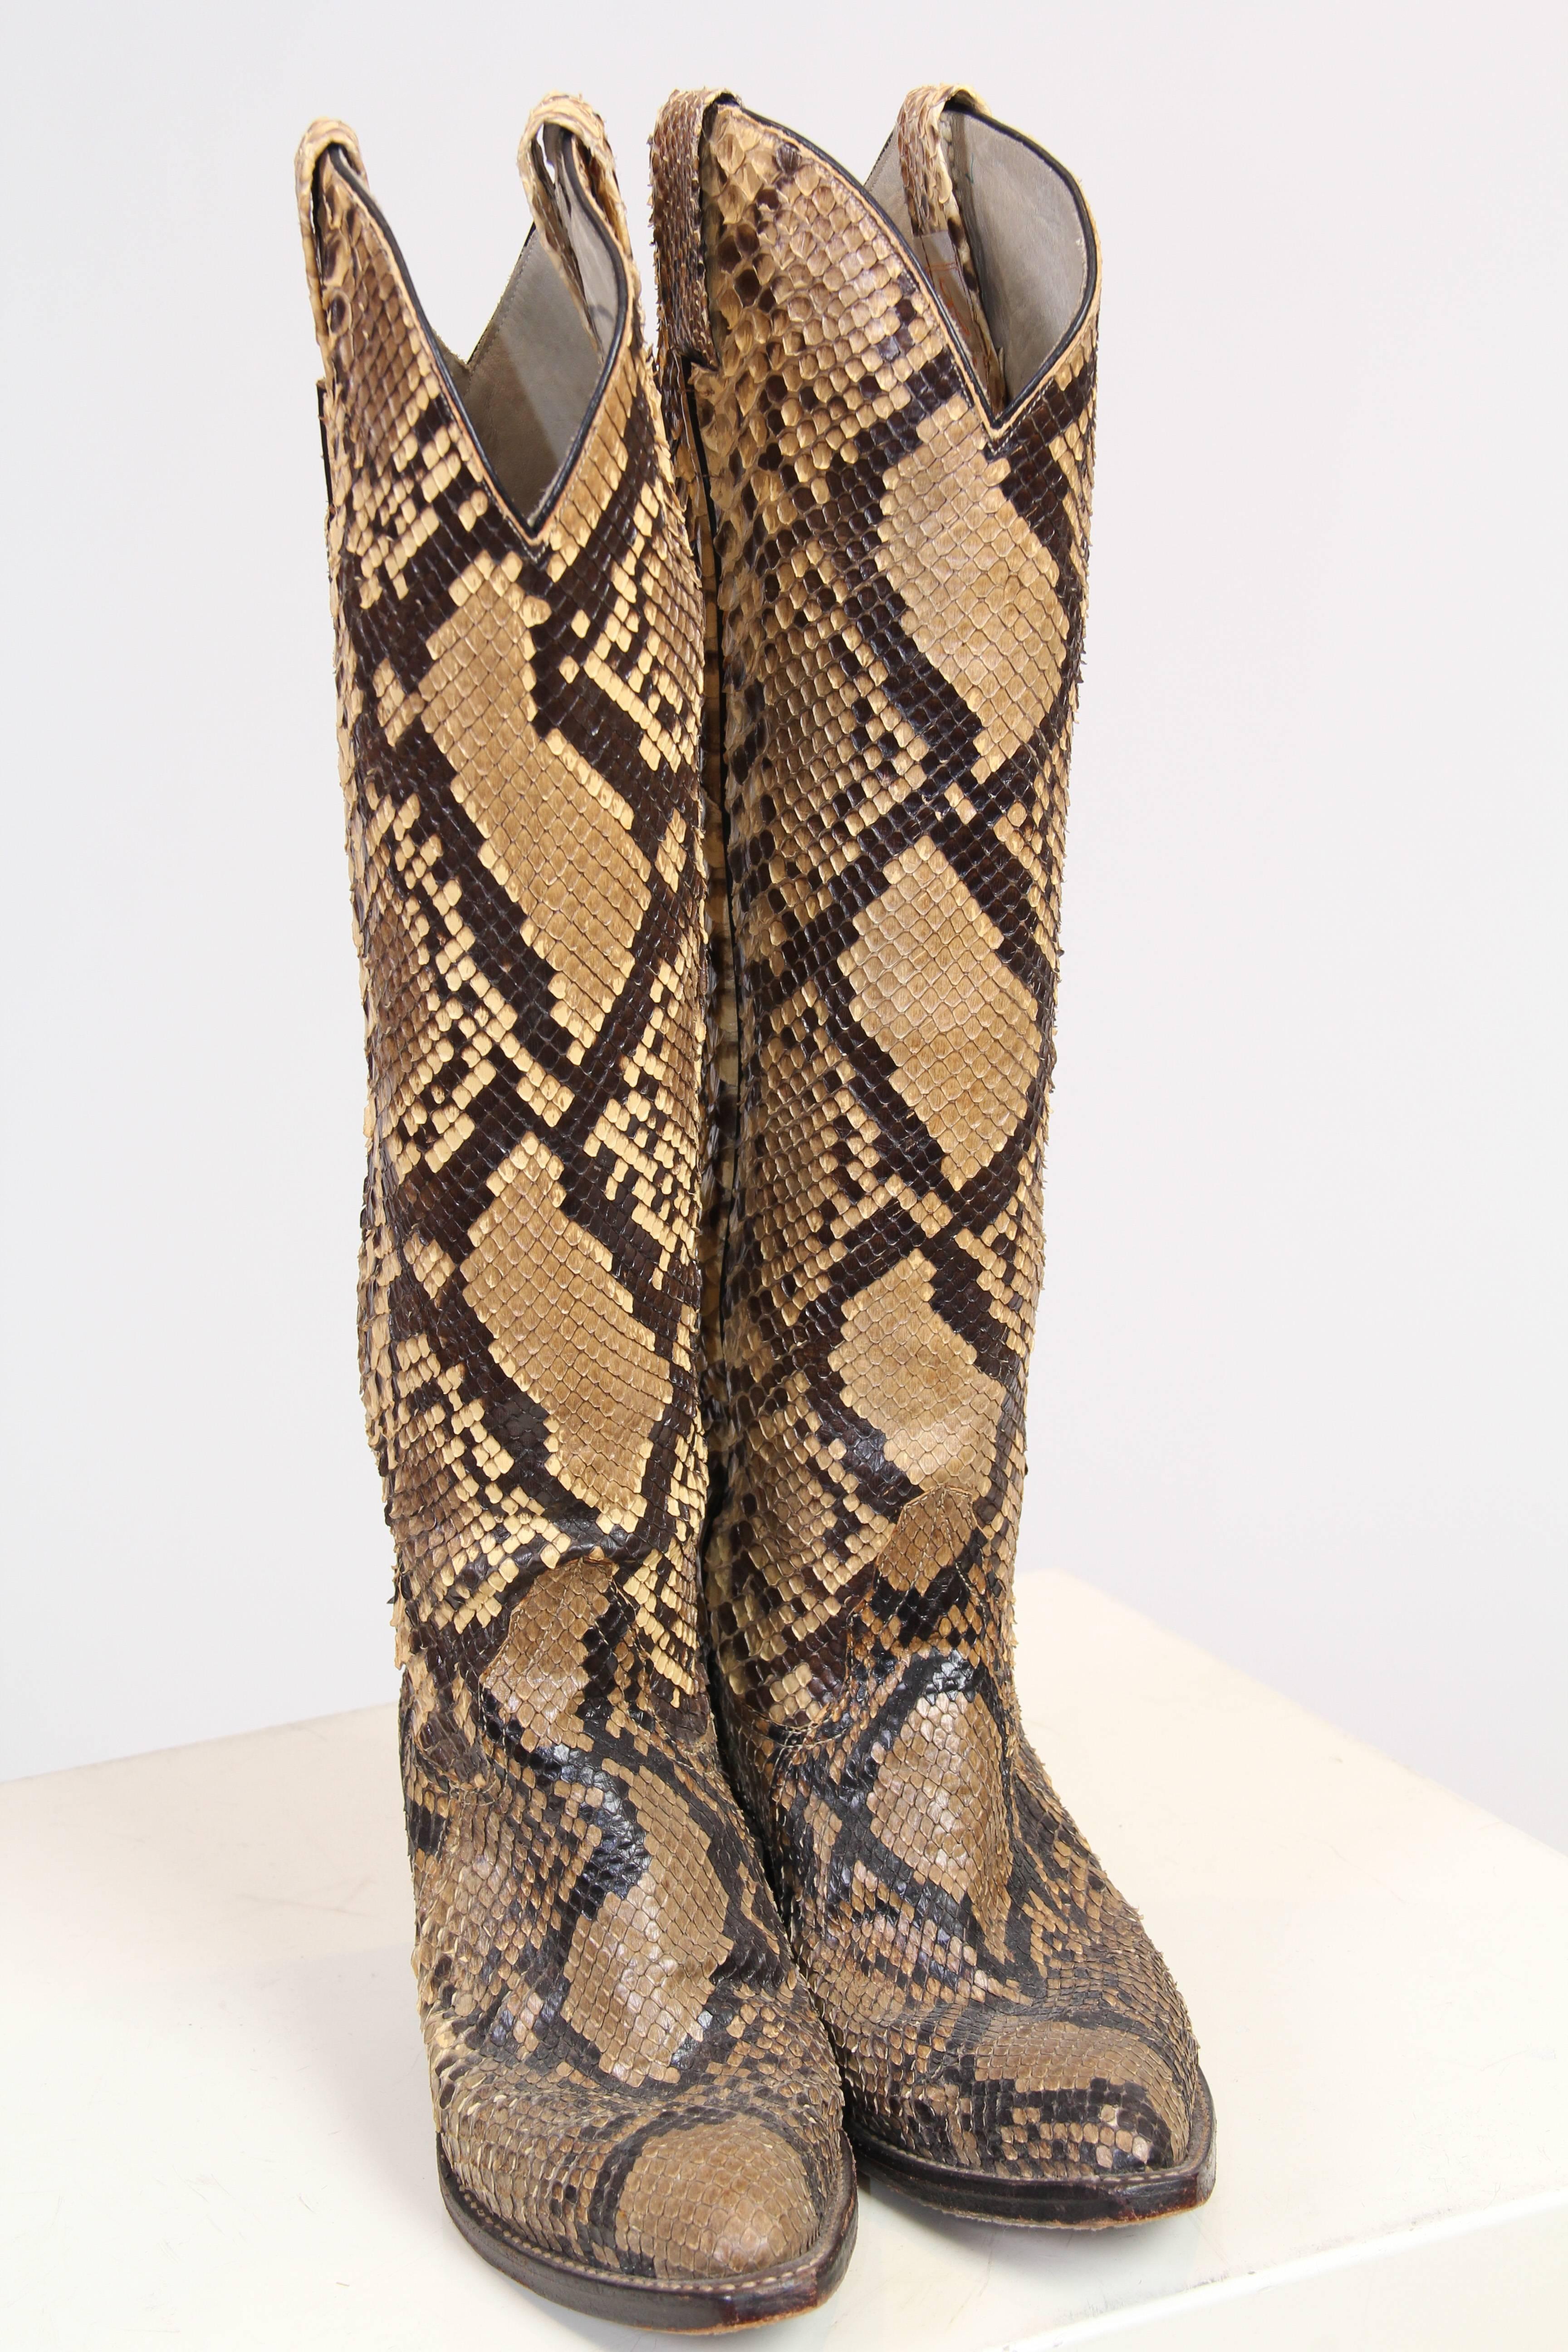 Brown Tall Snakeskin Cowboy Boots from Larry Mahan